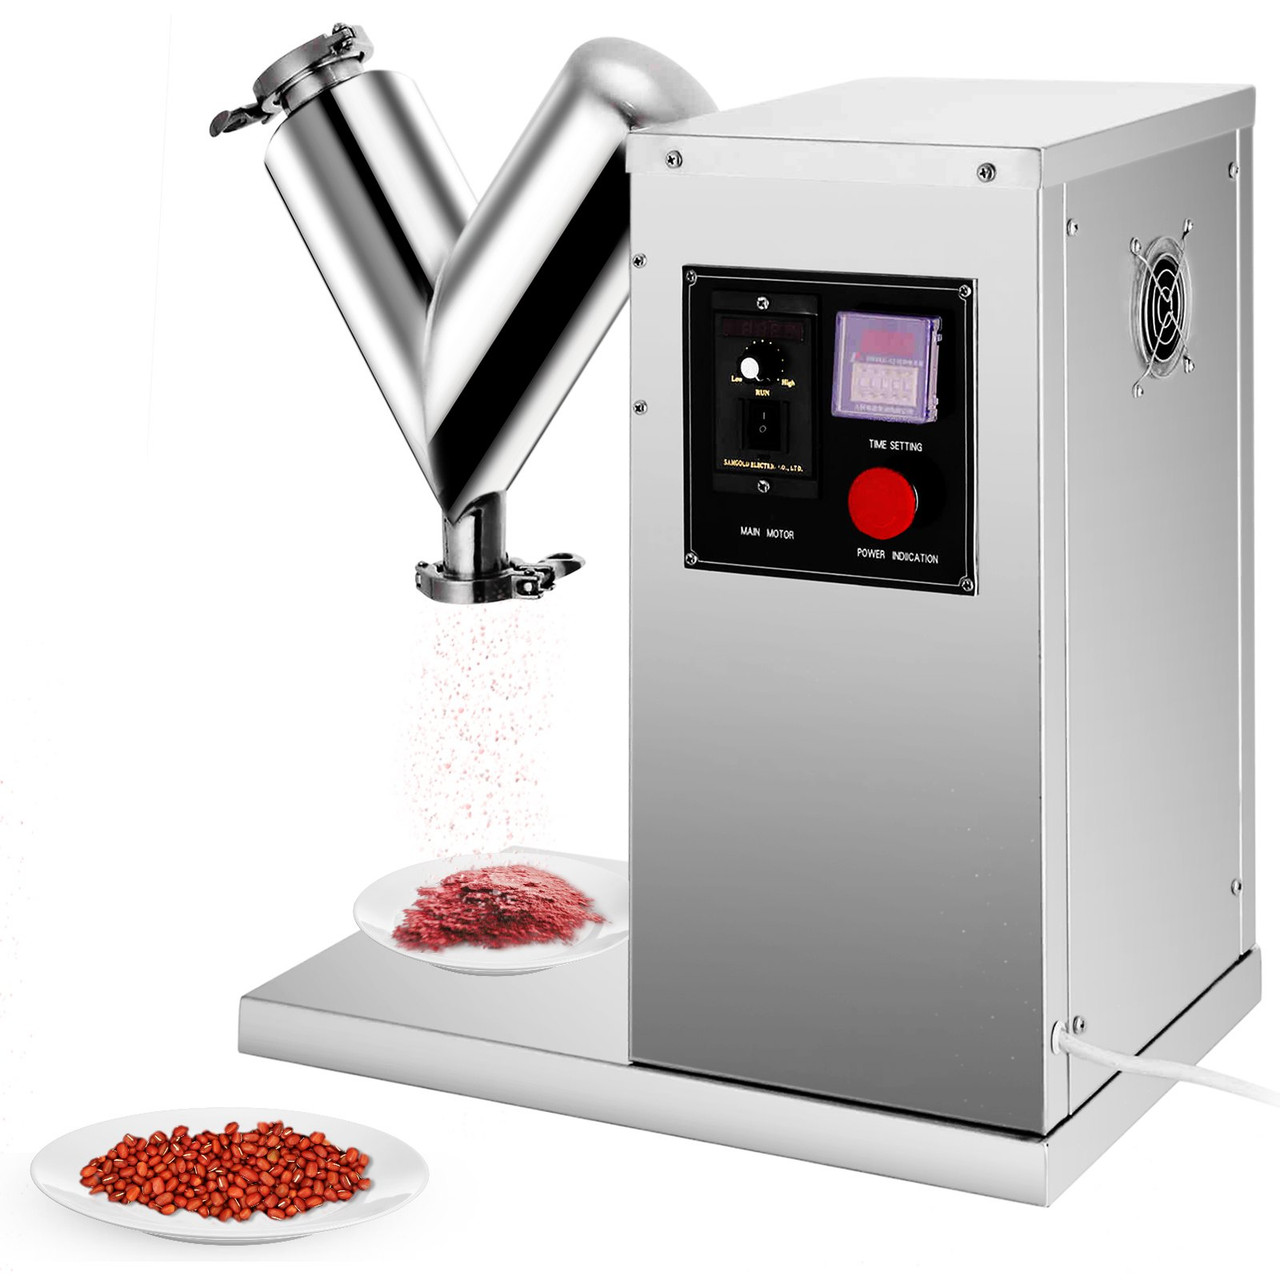 VH-2, 0.79 Gallon Mixer, Adjustable Mixing Speed V Type Powder Blending Machine, for Tea Herbs Rice Beans, 25.2 x 22.1 x 15.4 inches, Silver